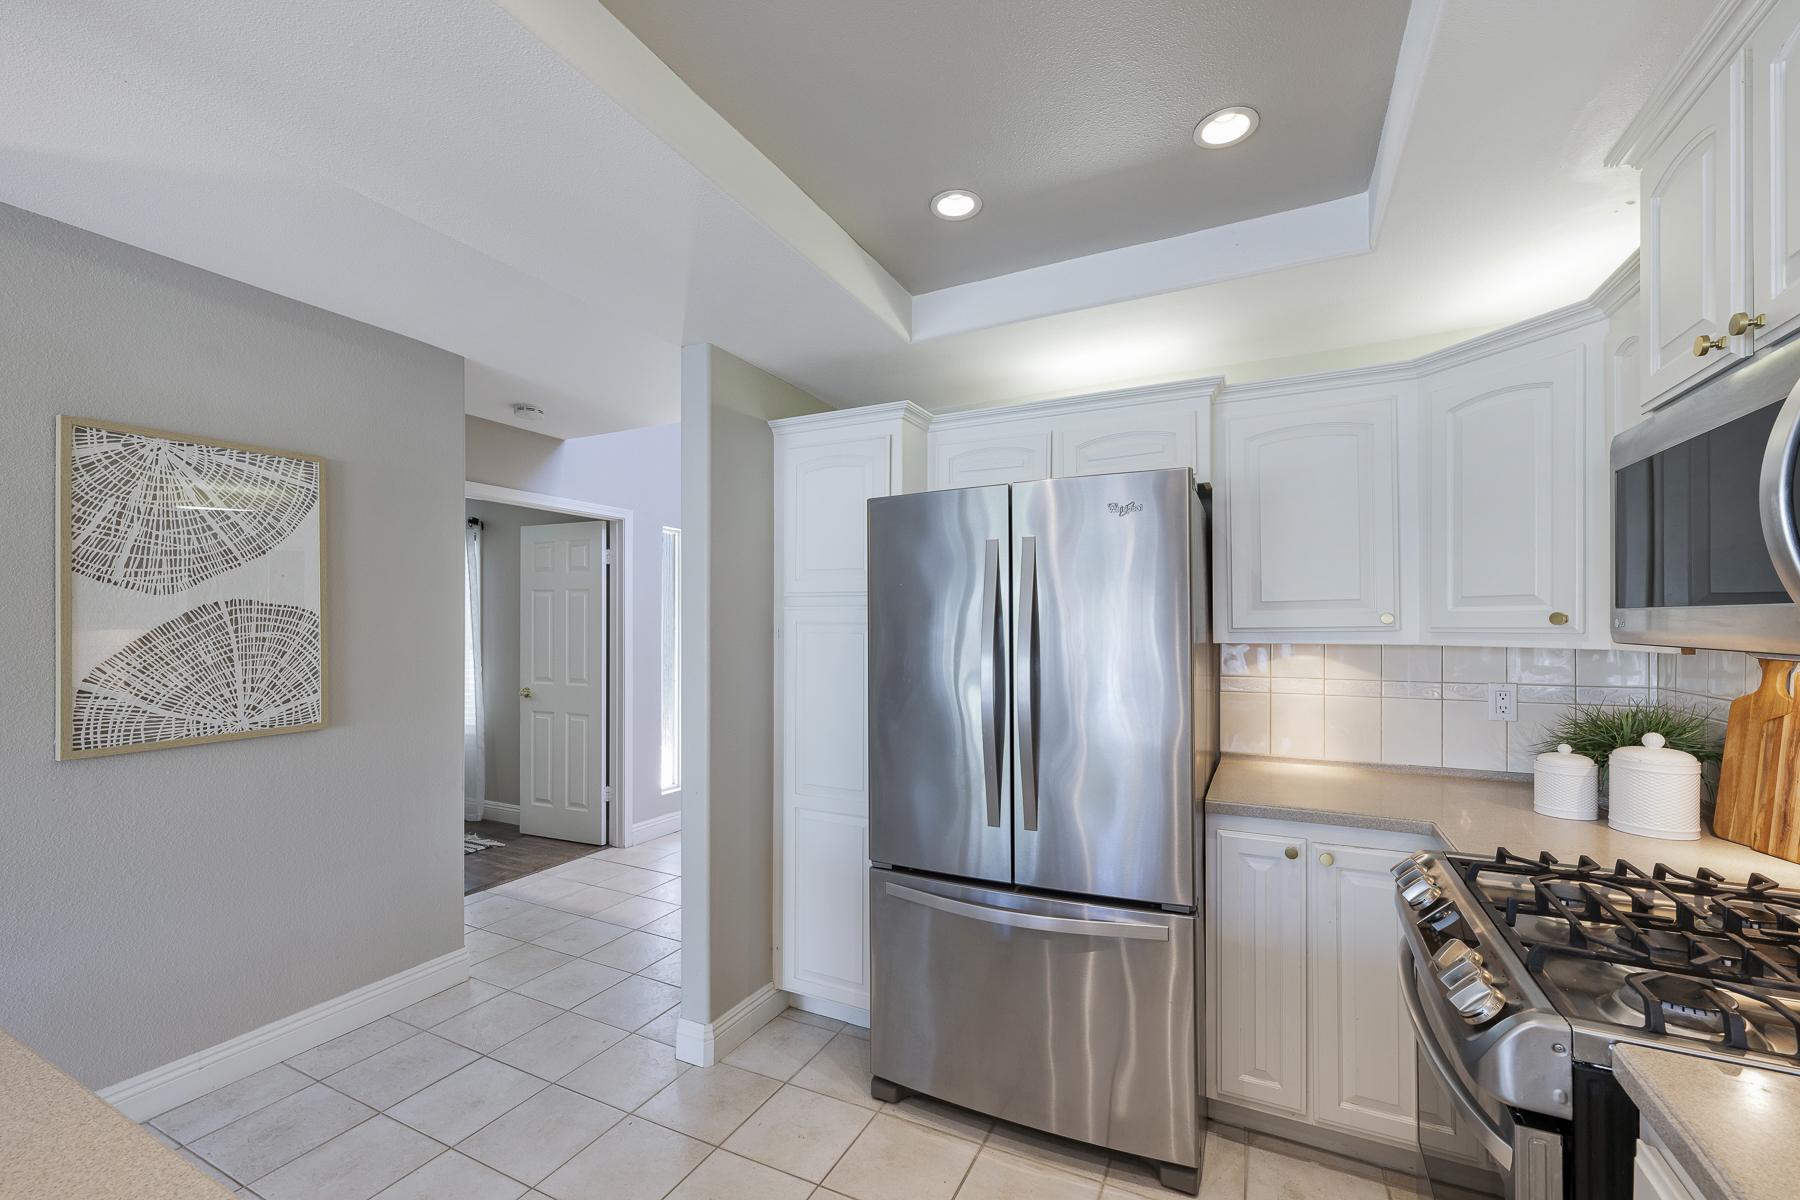 3424 Pinebrook Costa Mesa CA 92626: Kitchen picture with hallway leading to kitchen.